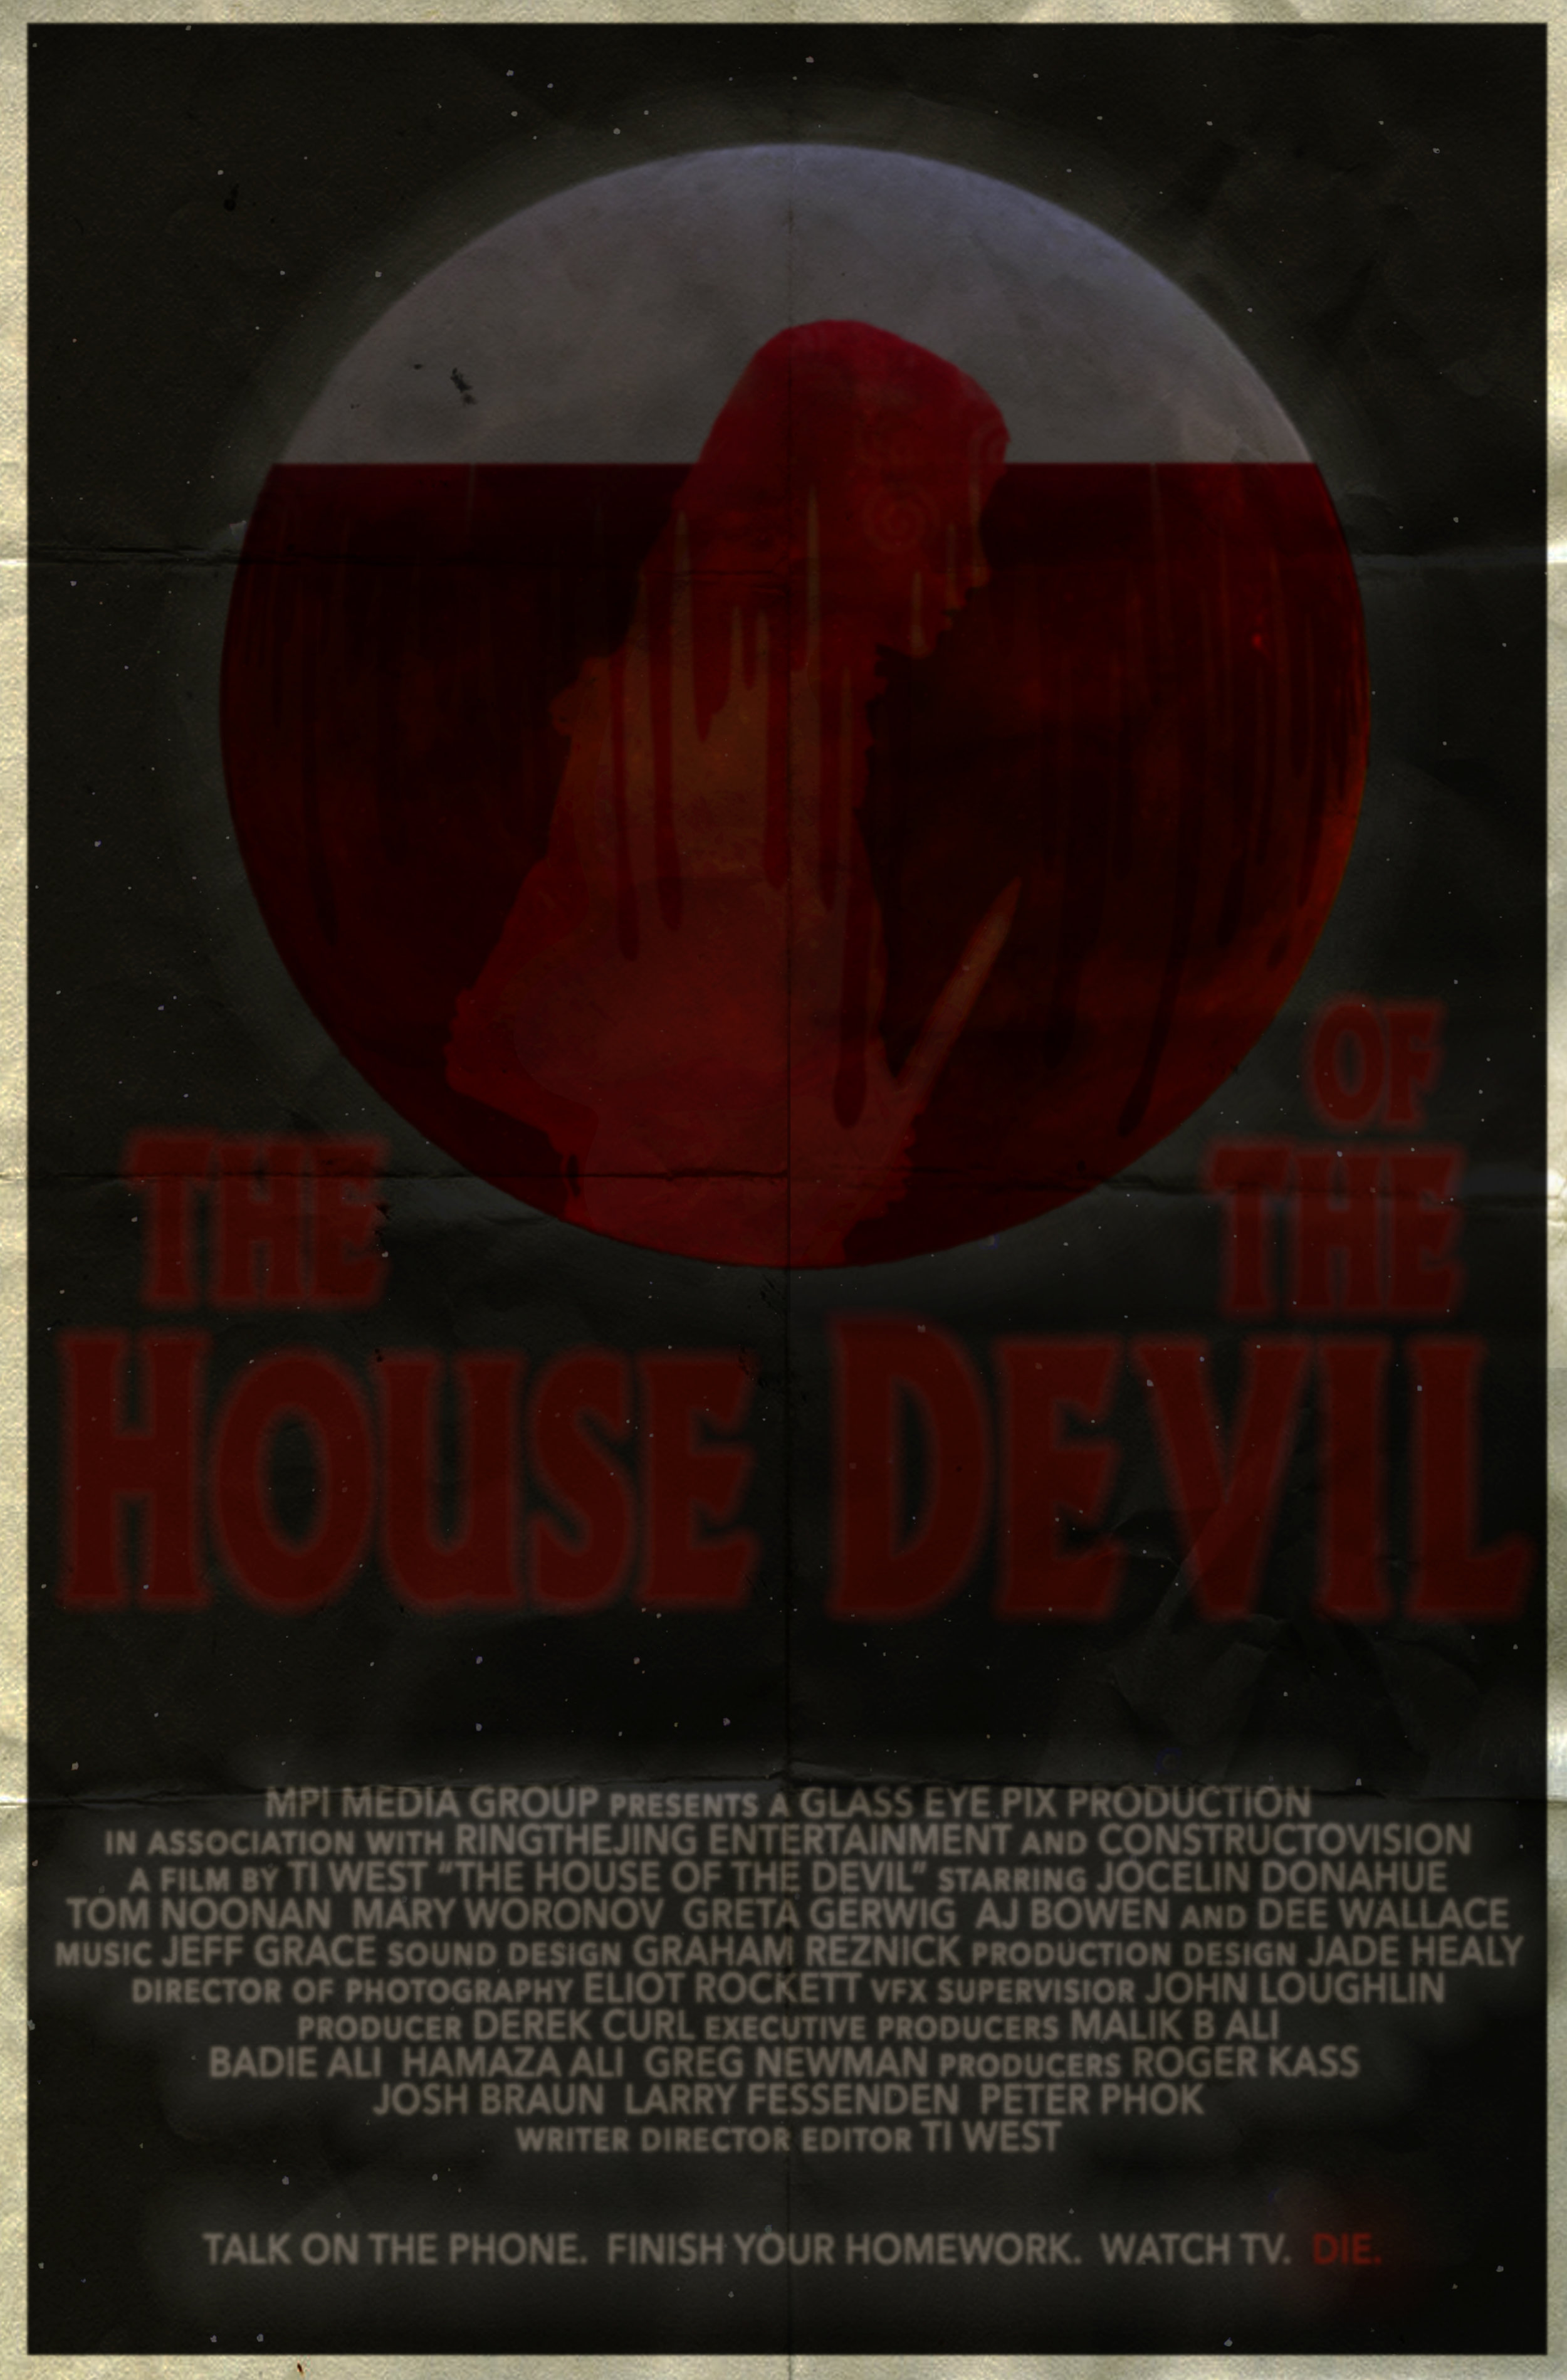 house of the devil poster w titles.jpg